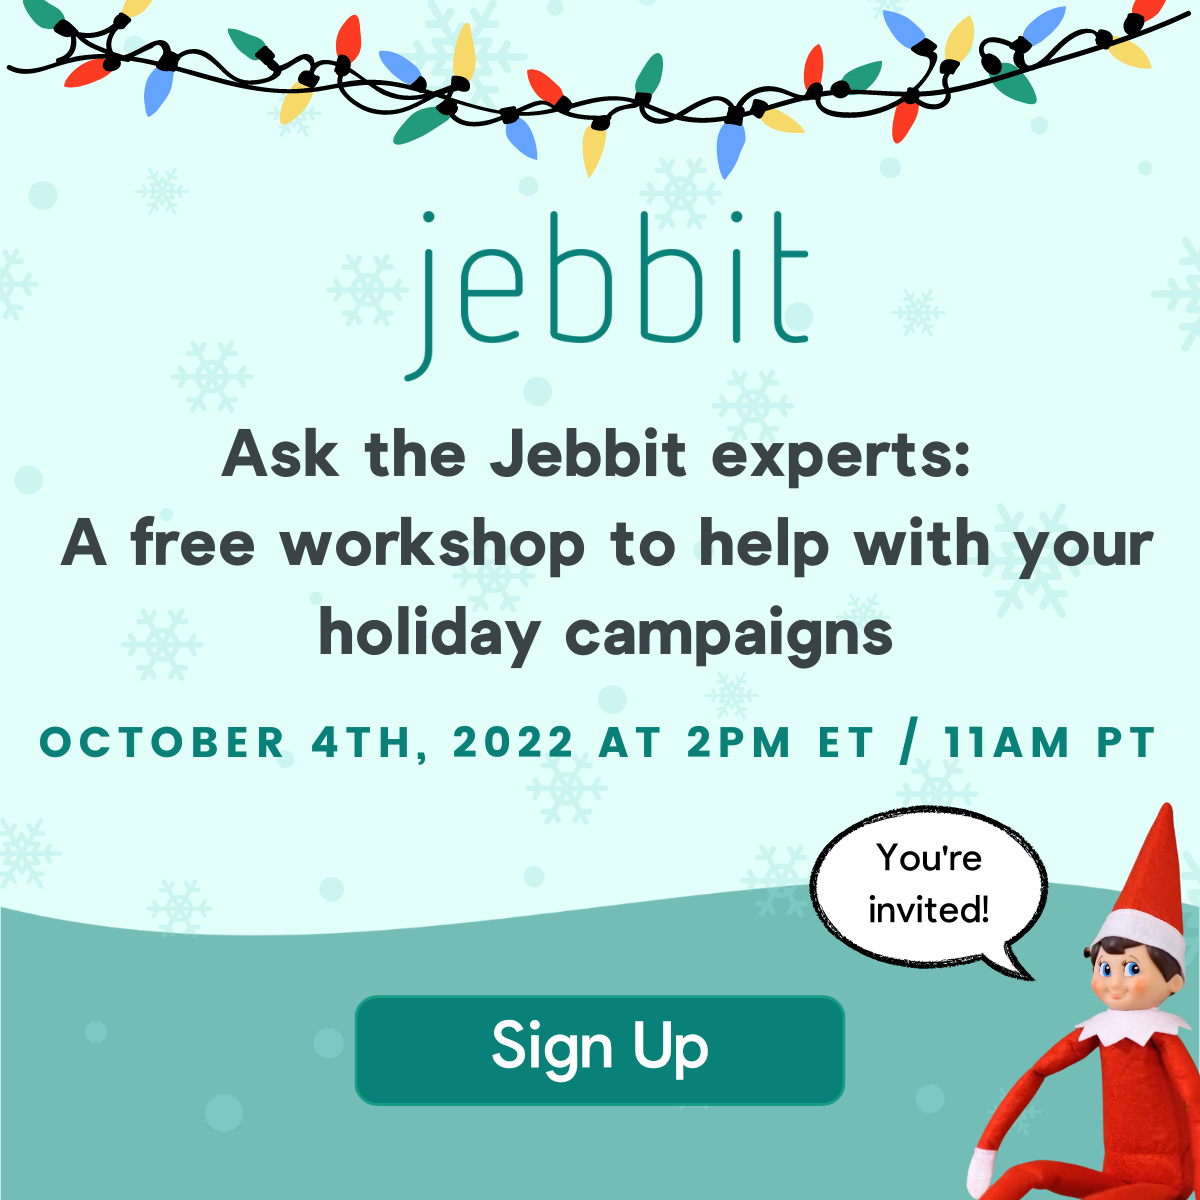 Ask the Jebbit experts: A free workshop to help with your holiday campaigns